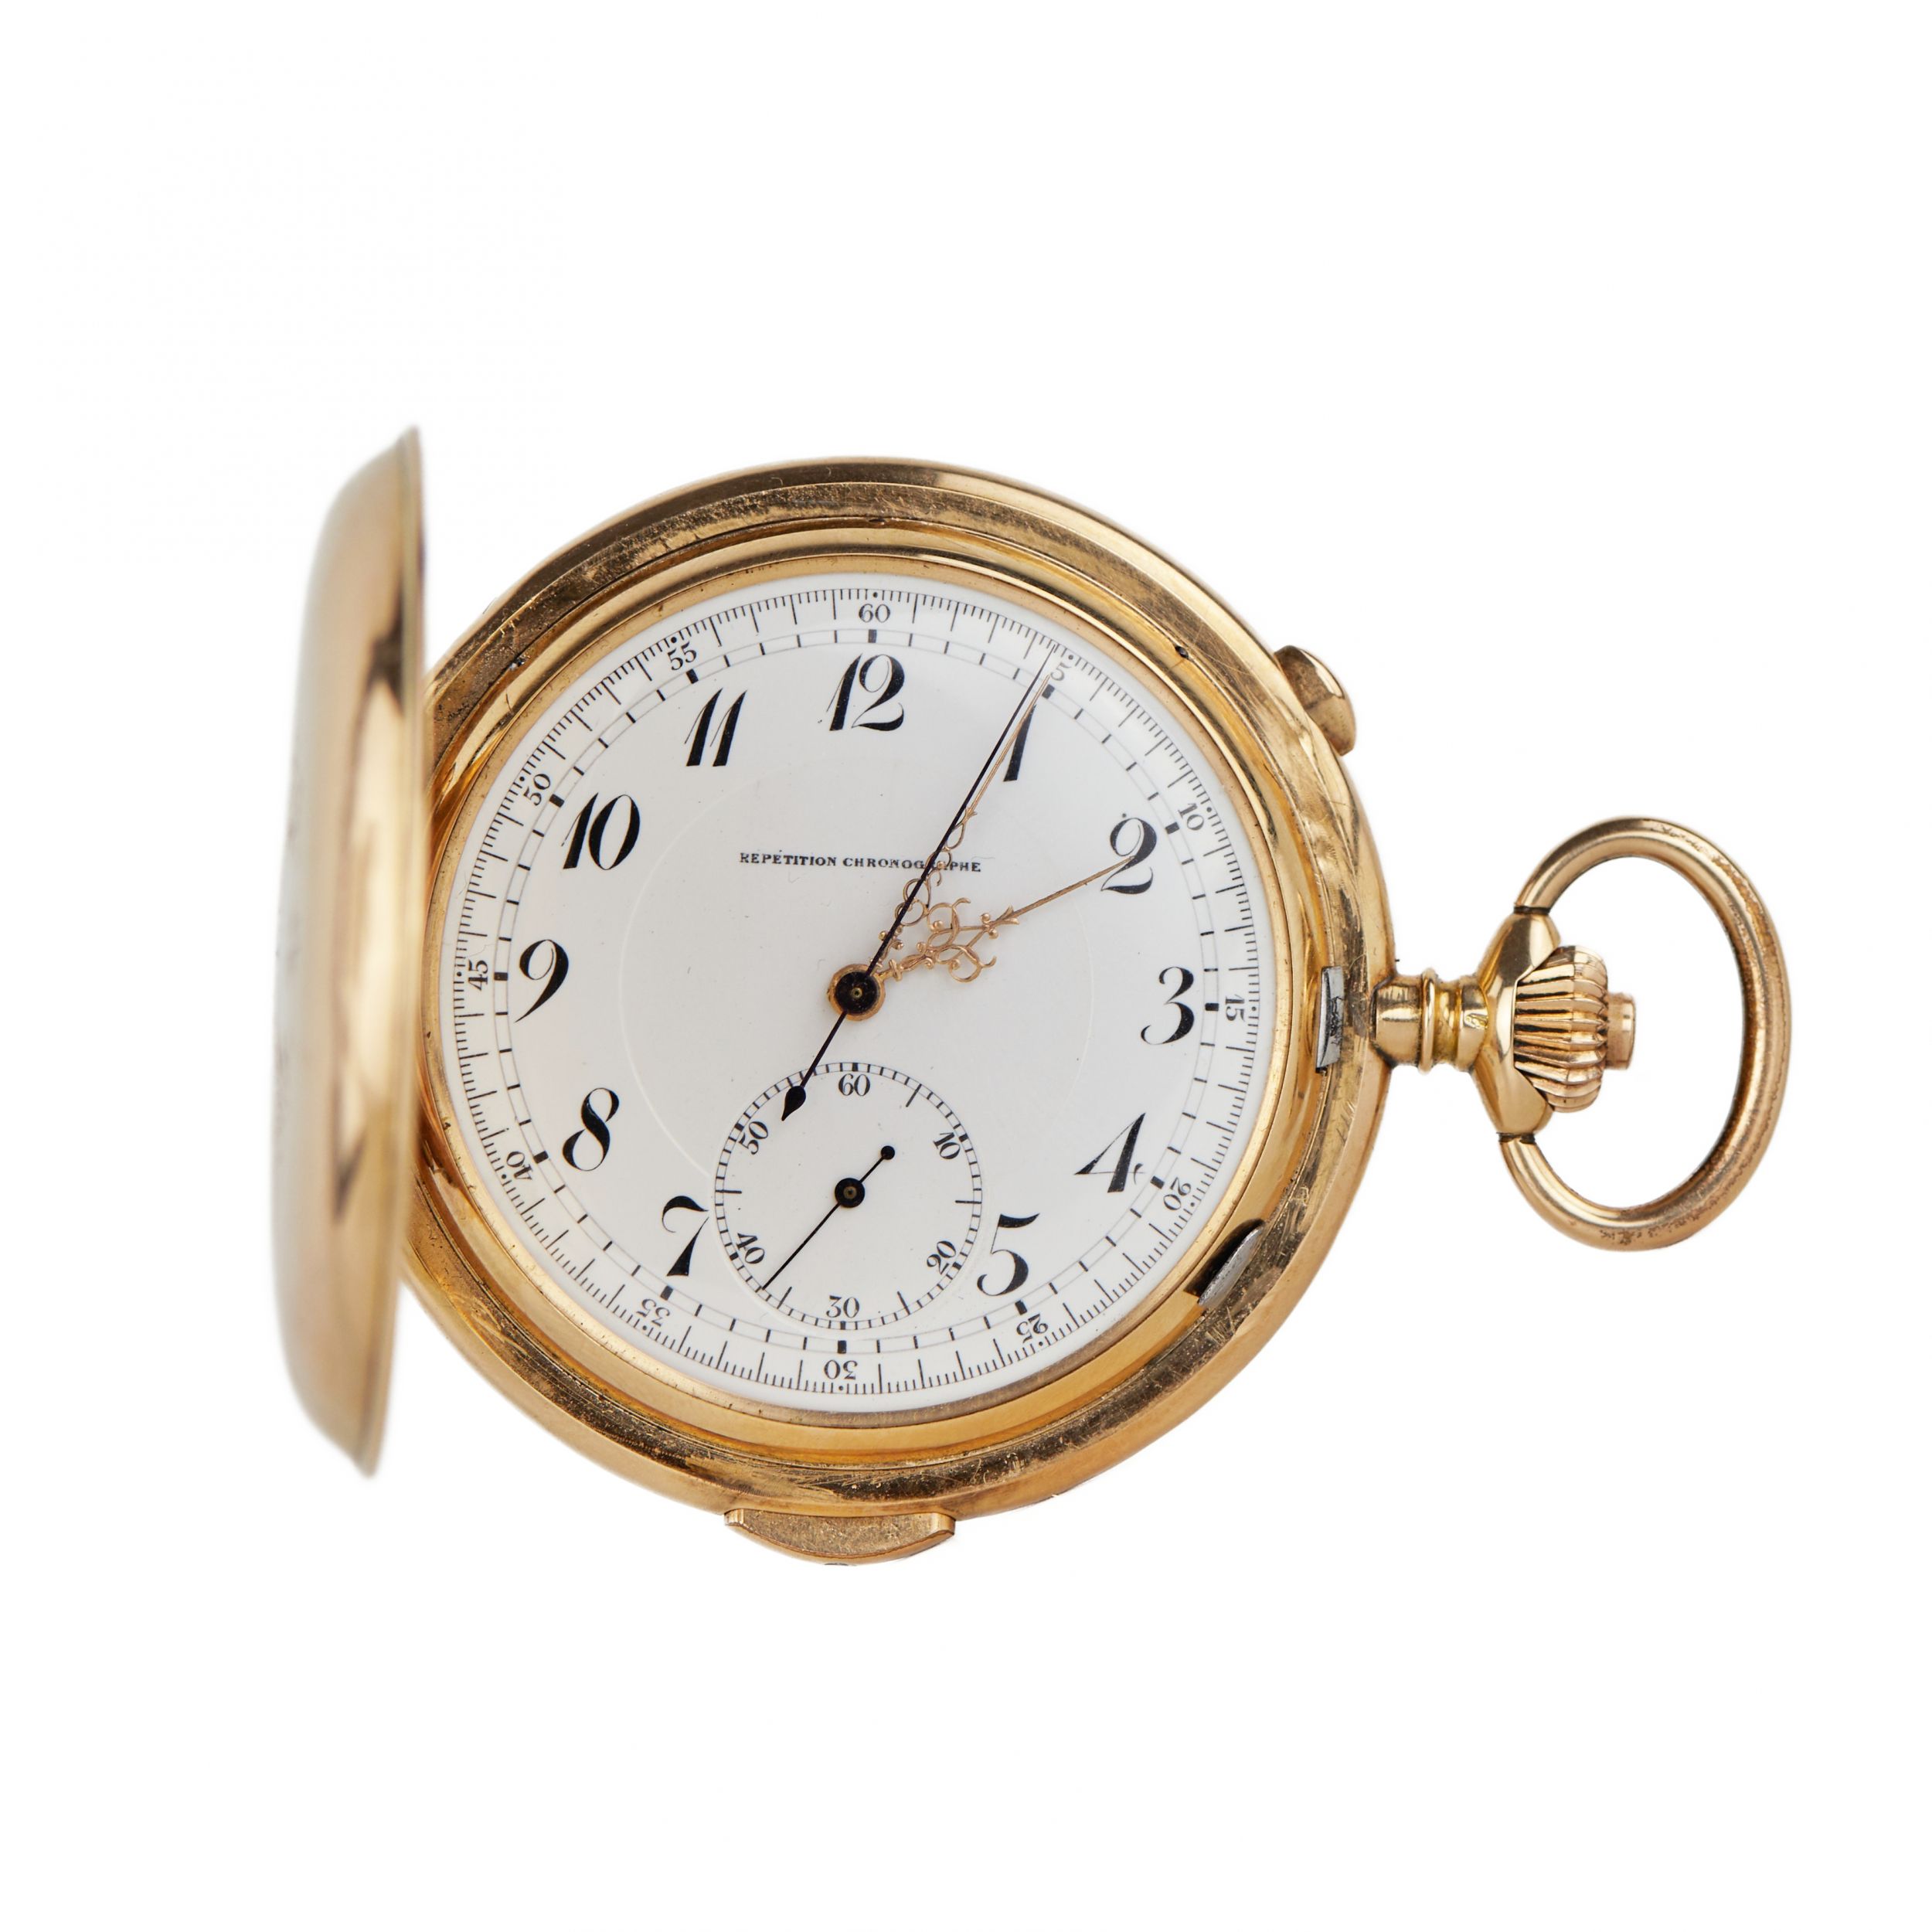 Heures Repetition Quarts Taschenuhr Chronographe 14k Gold Pocket Watch - Image 2 of 11